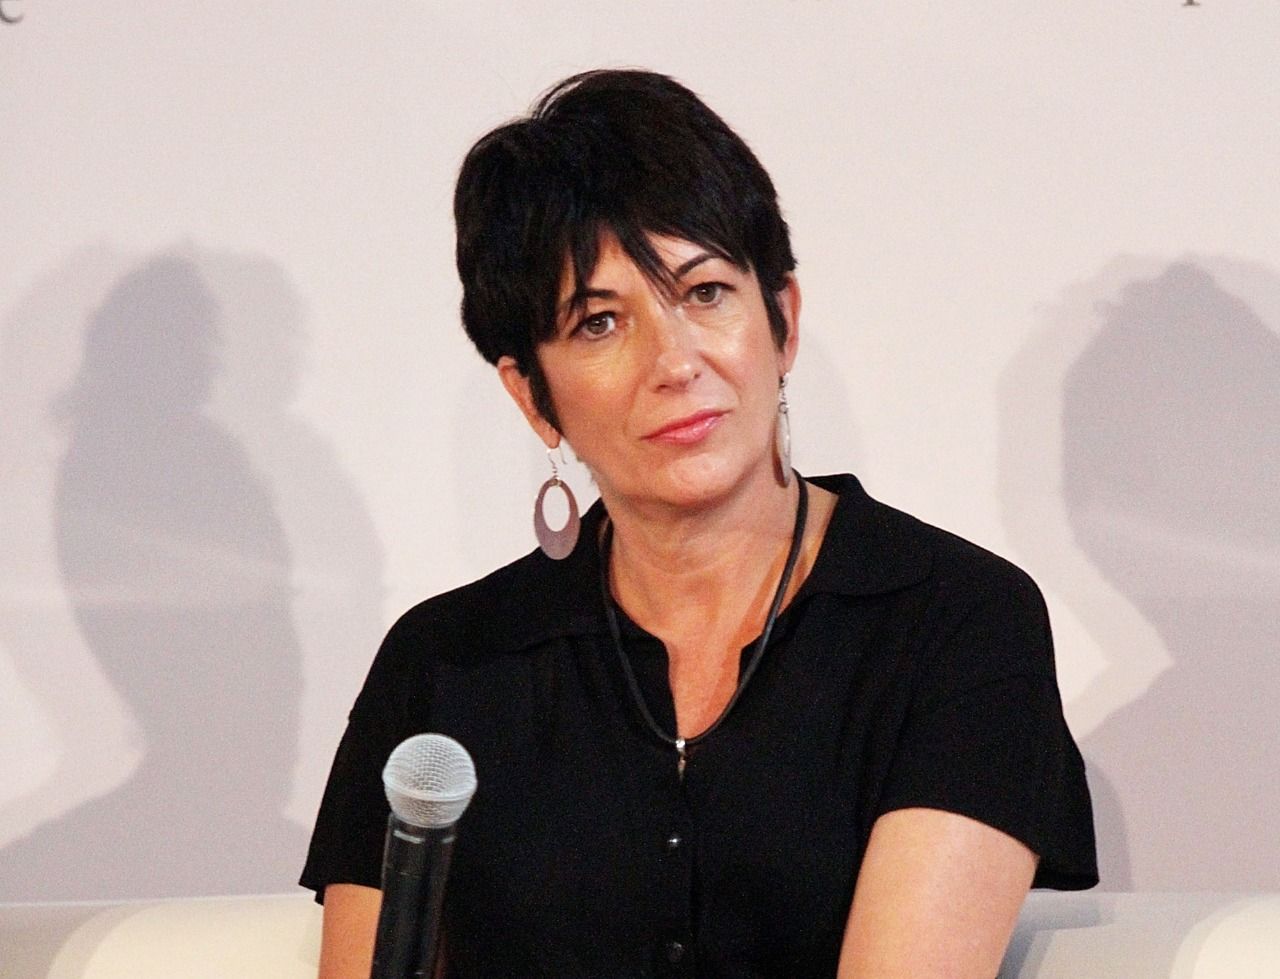 Ghislaine Maxwell slapped with two new charges of sex crimes